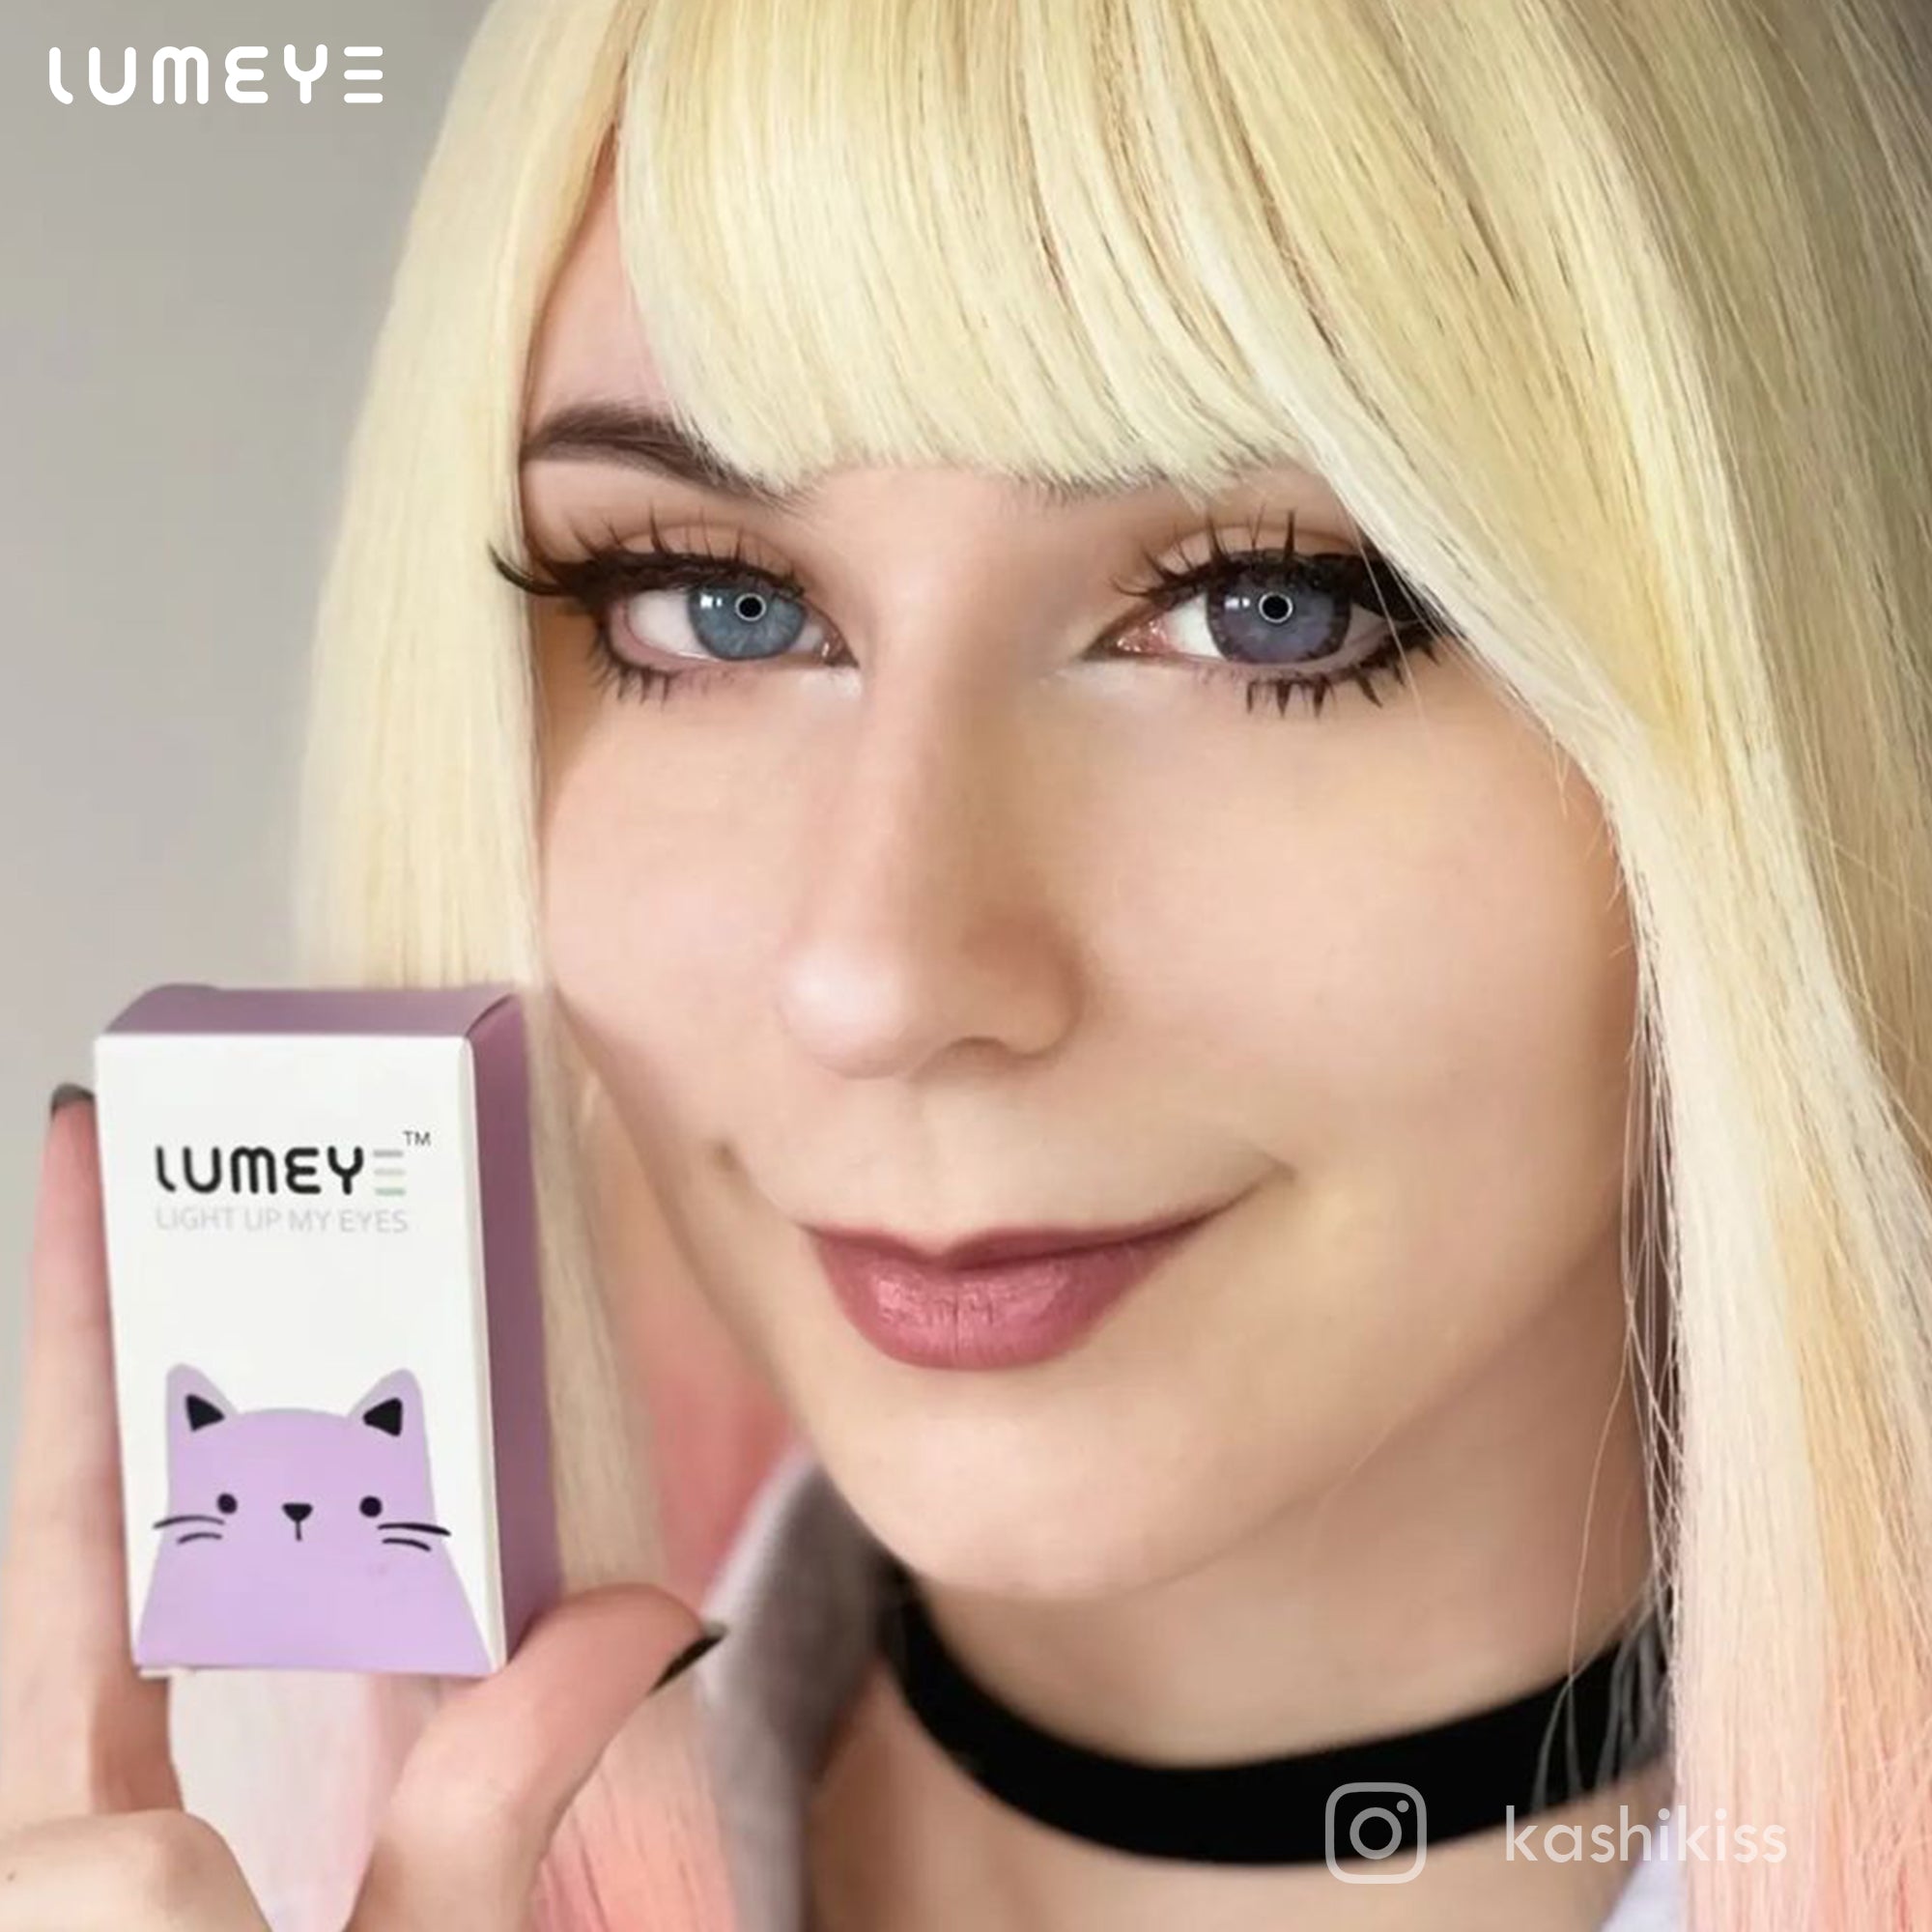 Best COLORED CONTACTS - LUMEYE Tequila Pink Colored Contact Lenses - LUMEYE